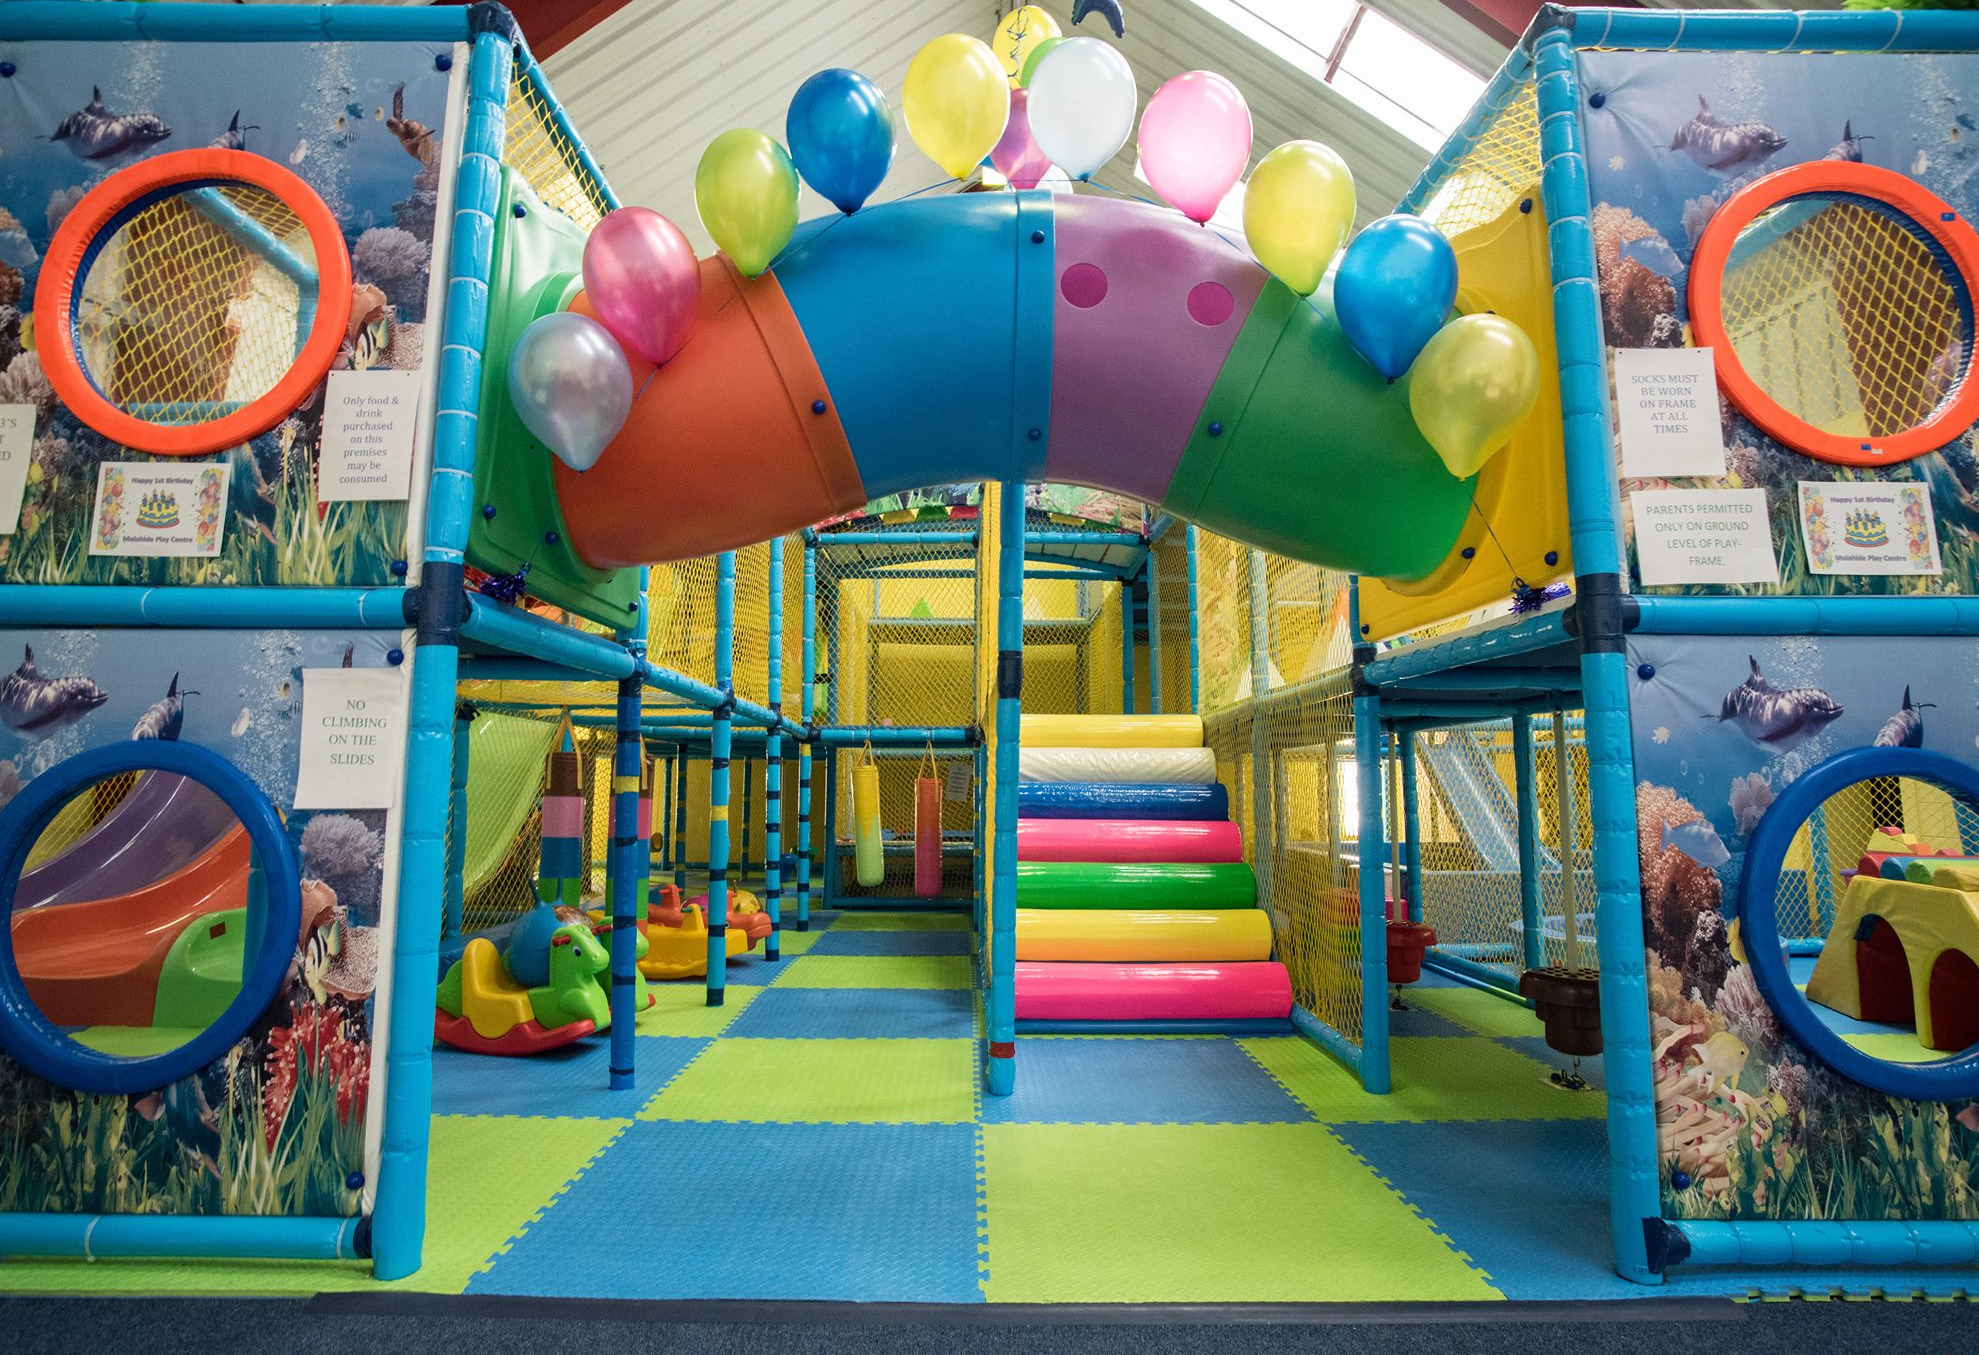 Malahide Play Centre - YourDaysOut